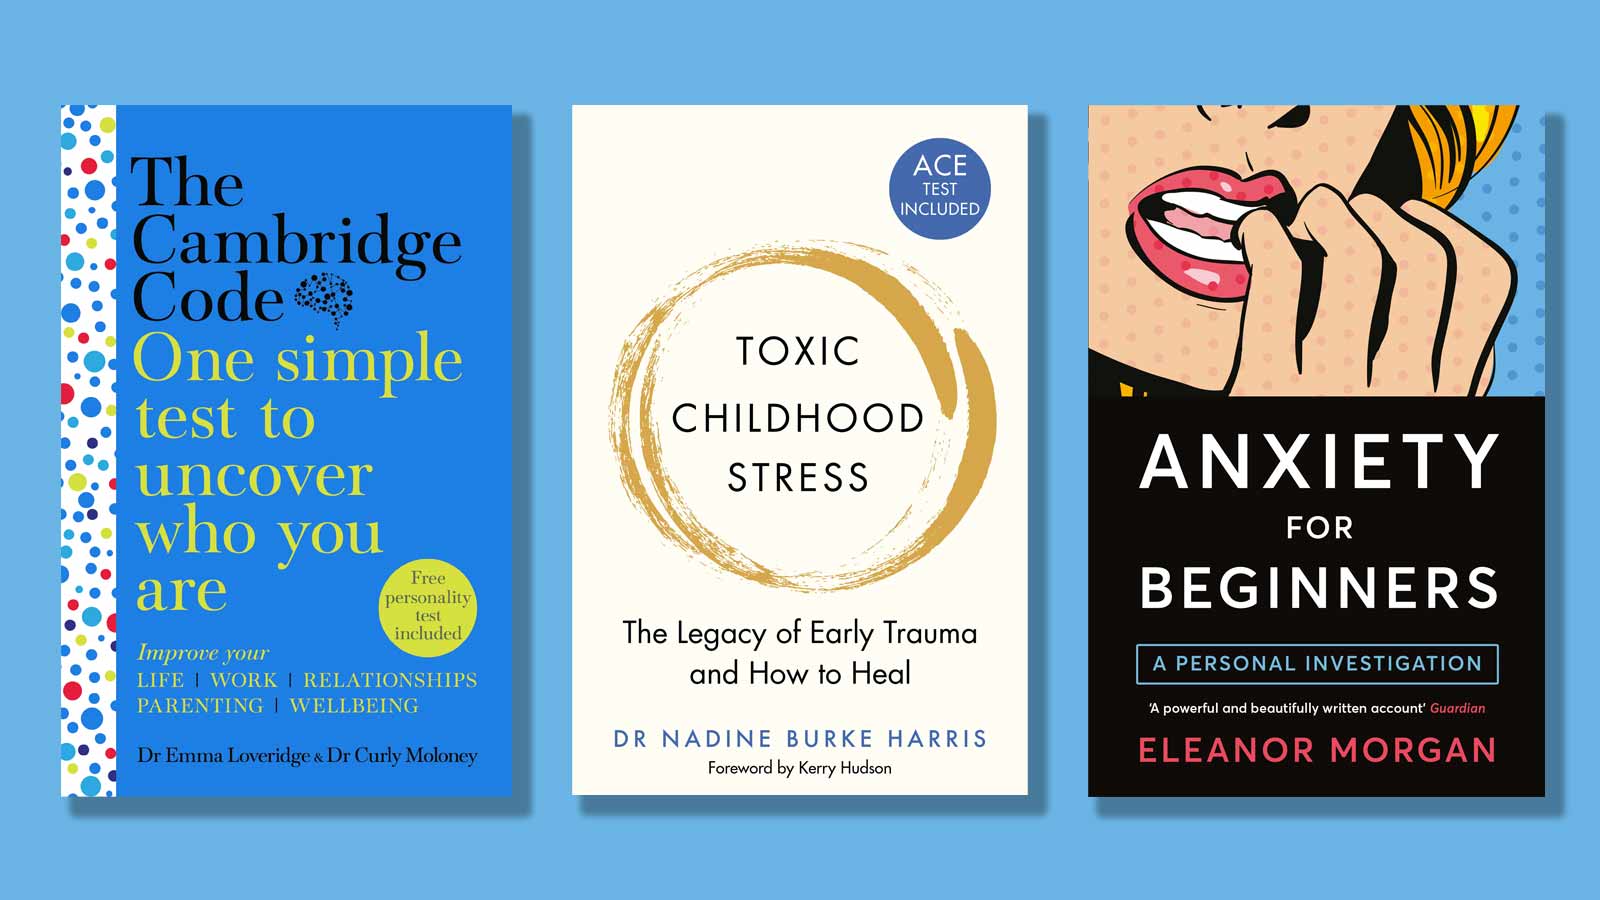 The Cambridge Code, Toxic Childhood Stress and Anxiety for Beginners book covers